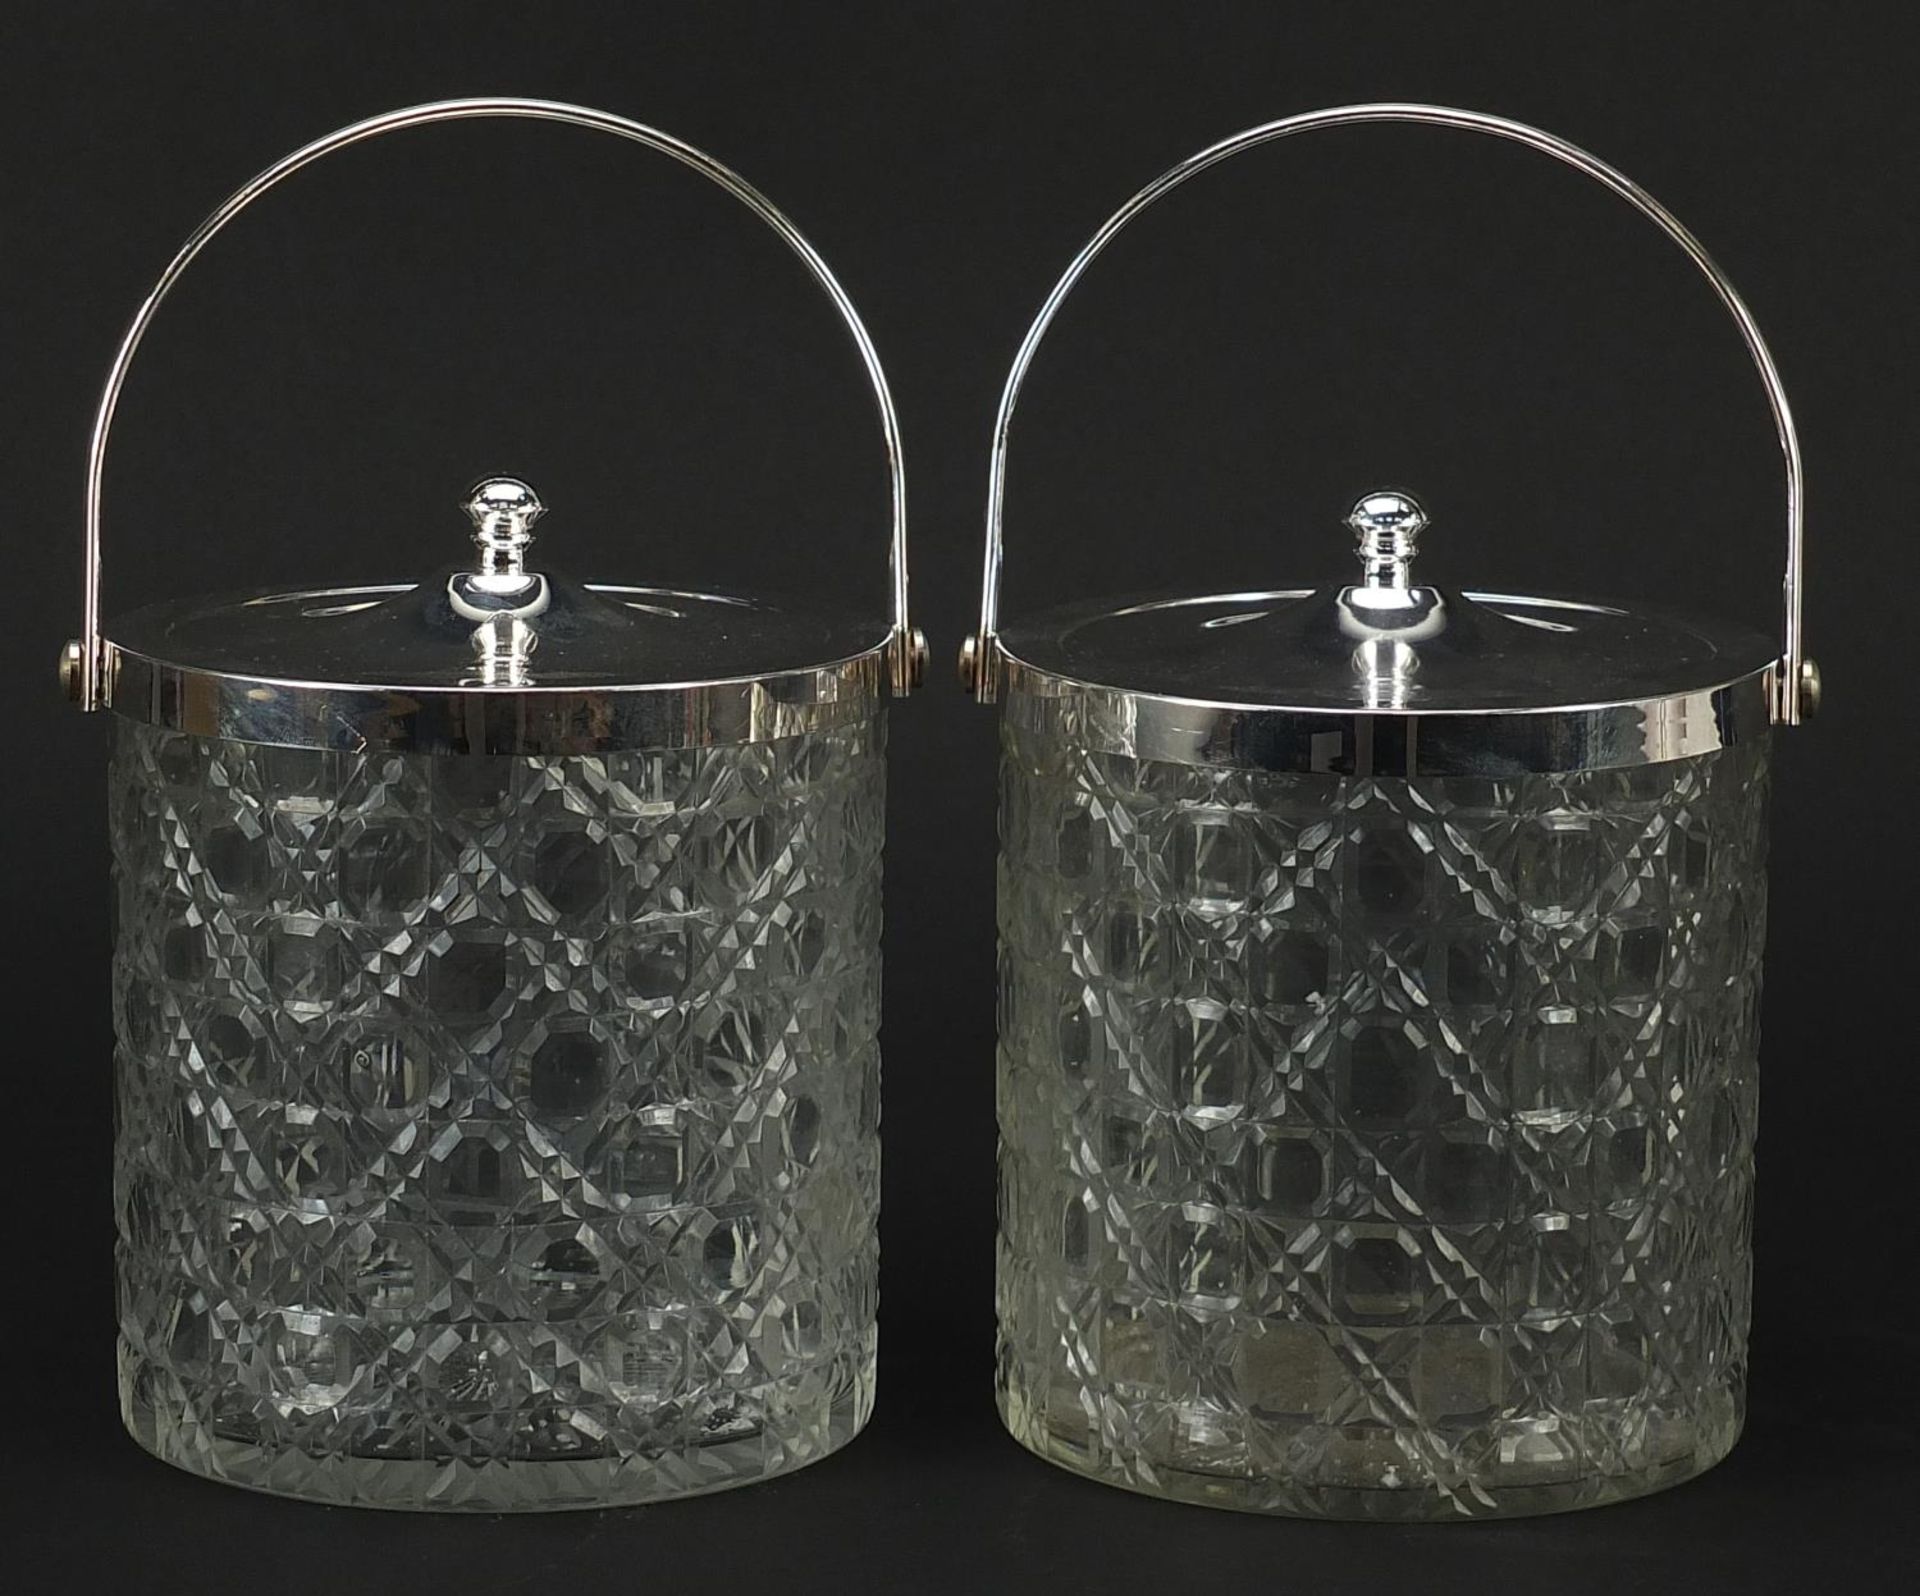 Pair of cut glass biscuit barrels with silver plated lids and swing handles, 15cm excluding the